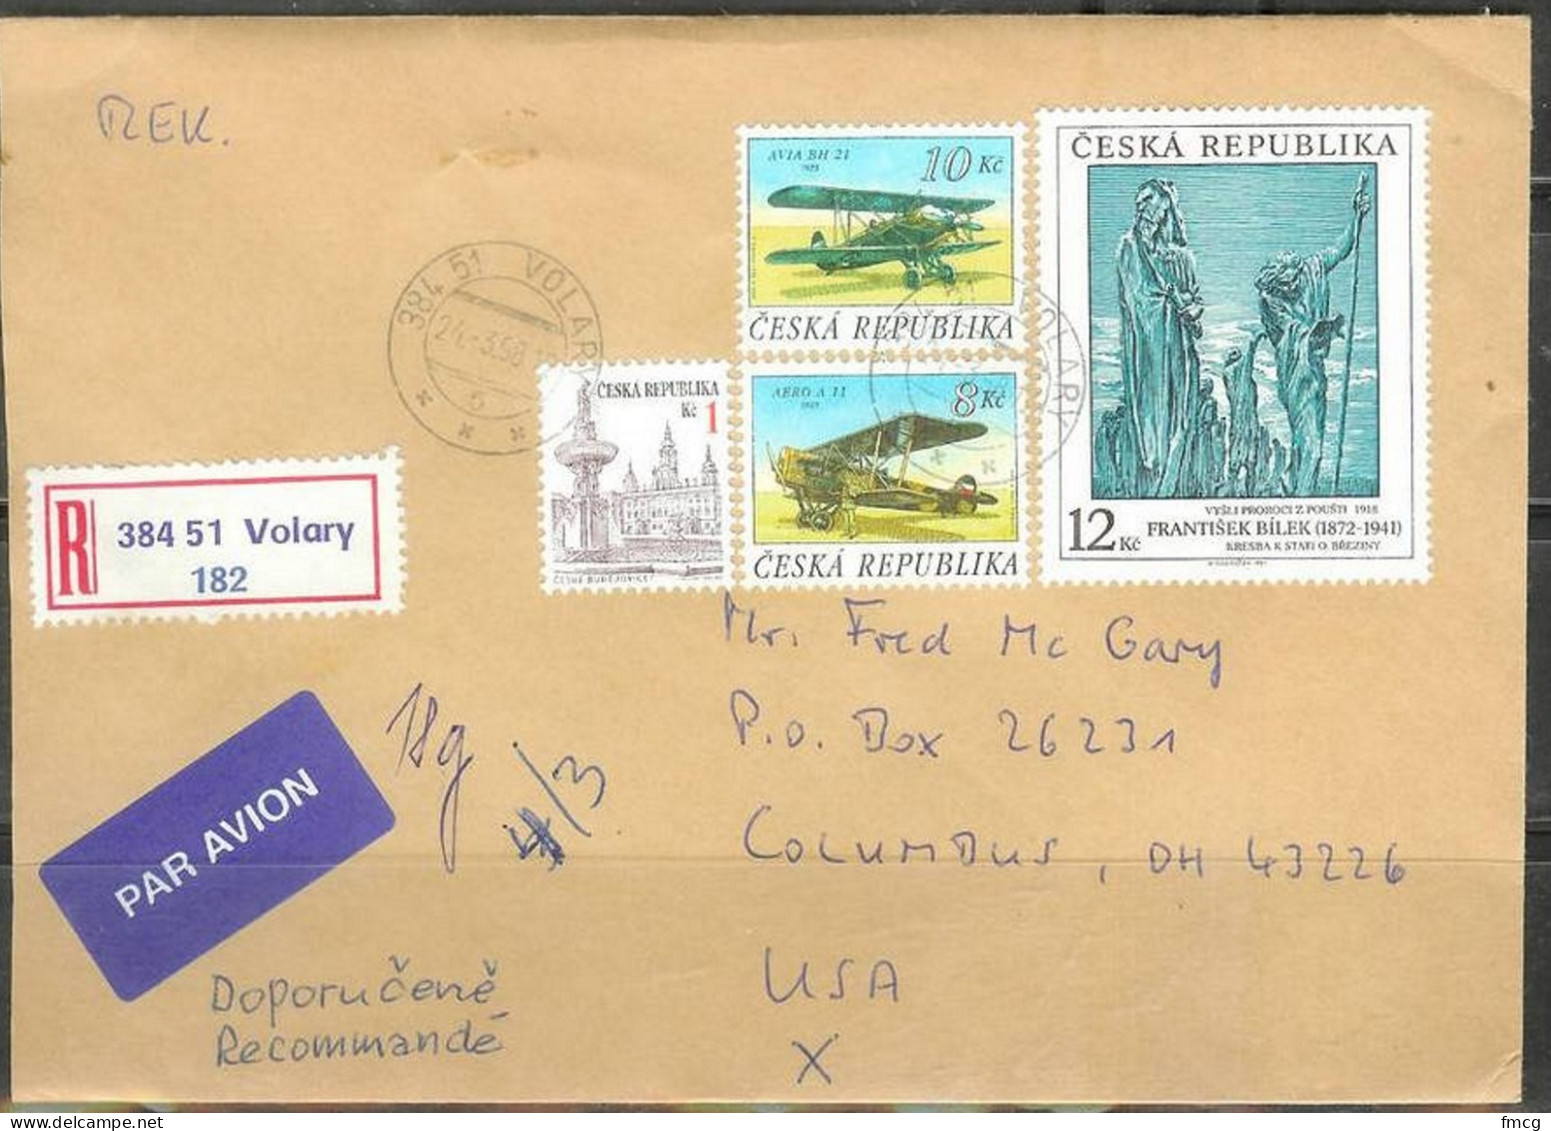 Czech Republic 1998 Bilek Painting And Bi-planes, Registered, Volary To Ohio USA - Covers & Documents